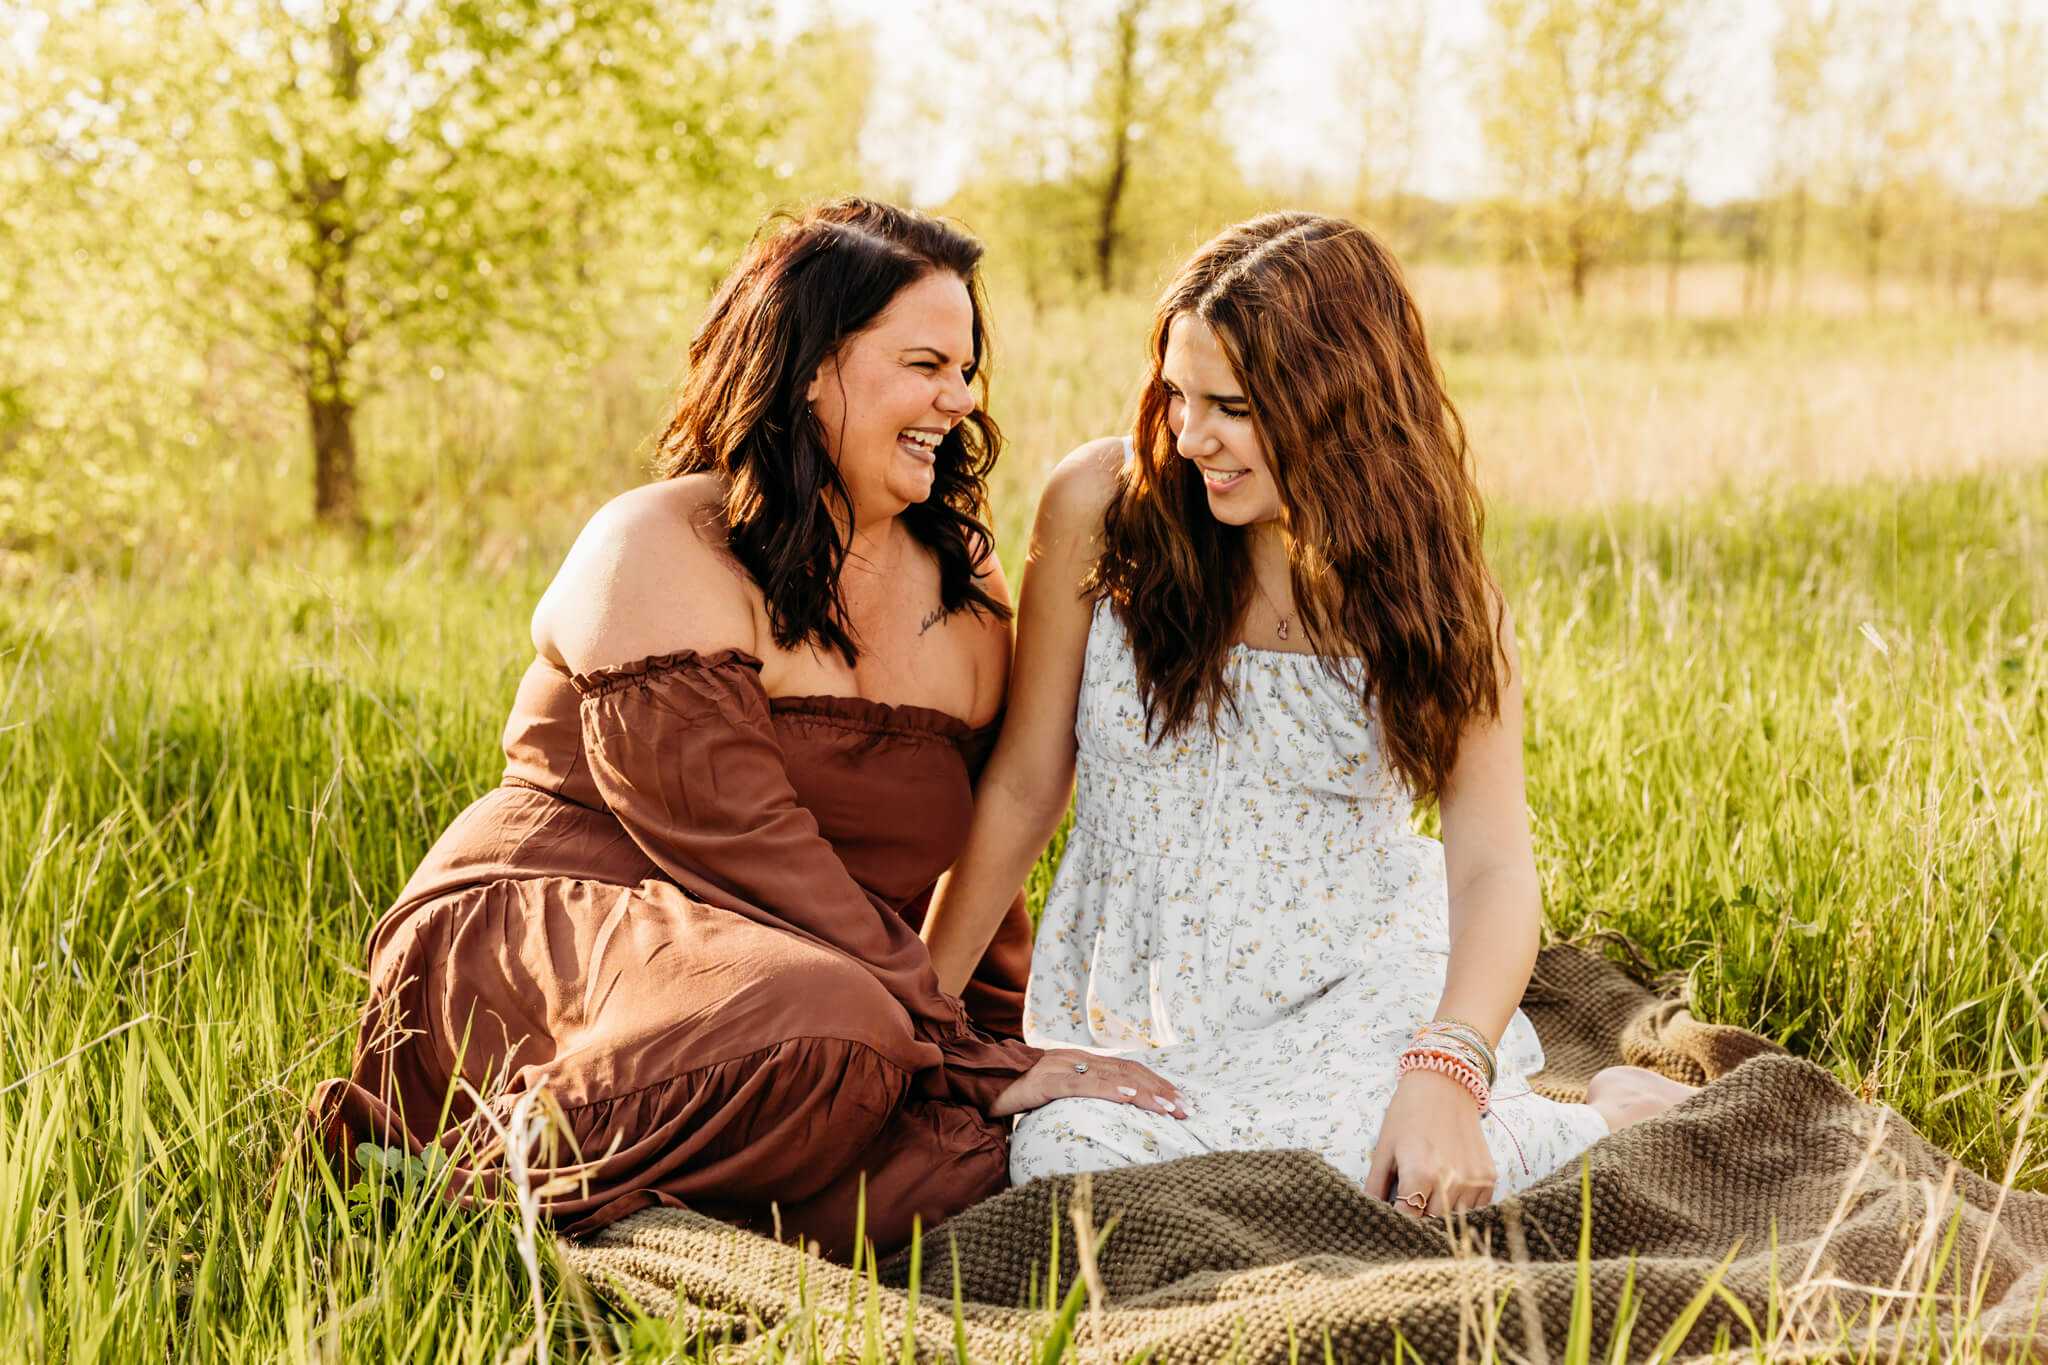 mom in a brown dress and teen daughter in a white dress laughing as they snuggle together on a blanket 